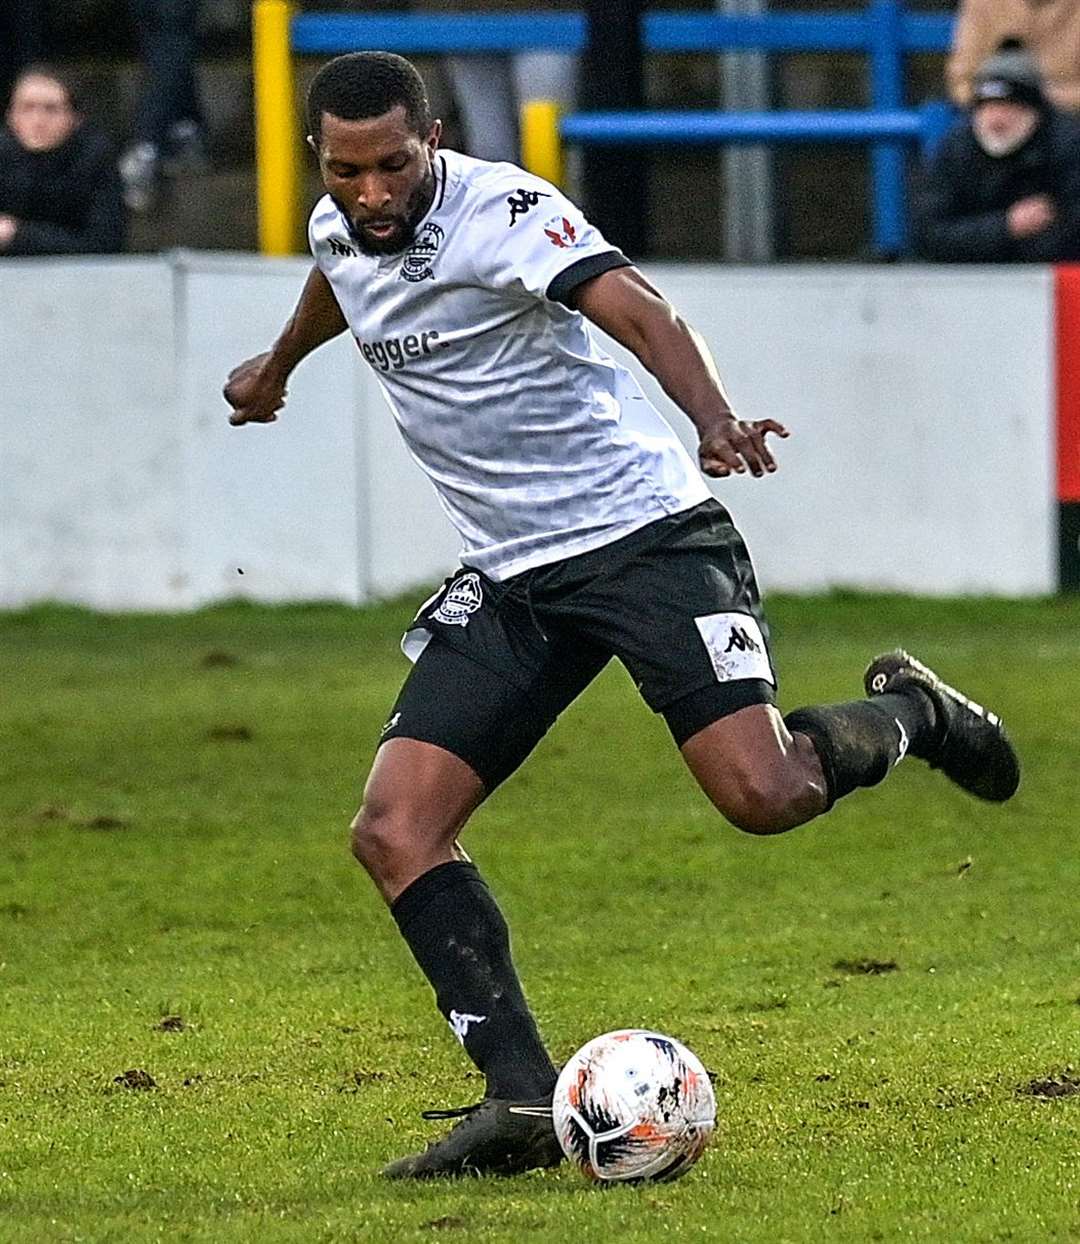 Tyrone Sterling was back in the starting line-up - albeit in a losing cause - at Concord on Tuesday. Picture: Stuart Brock